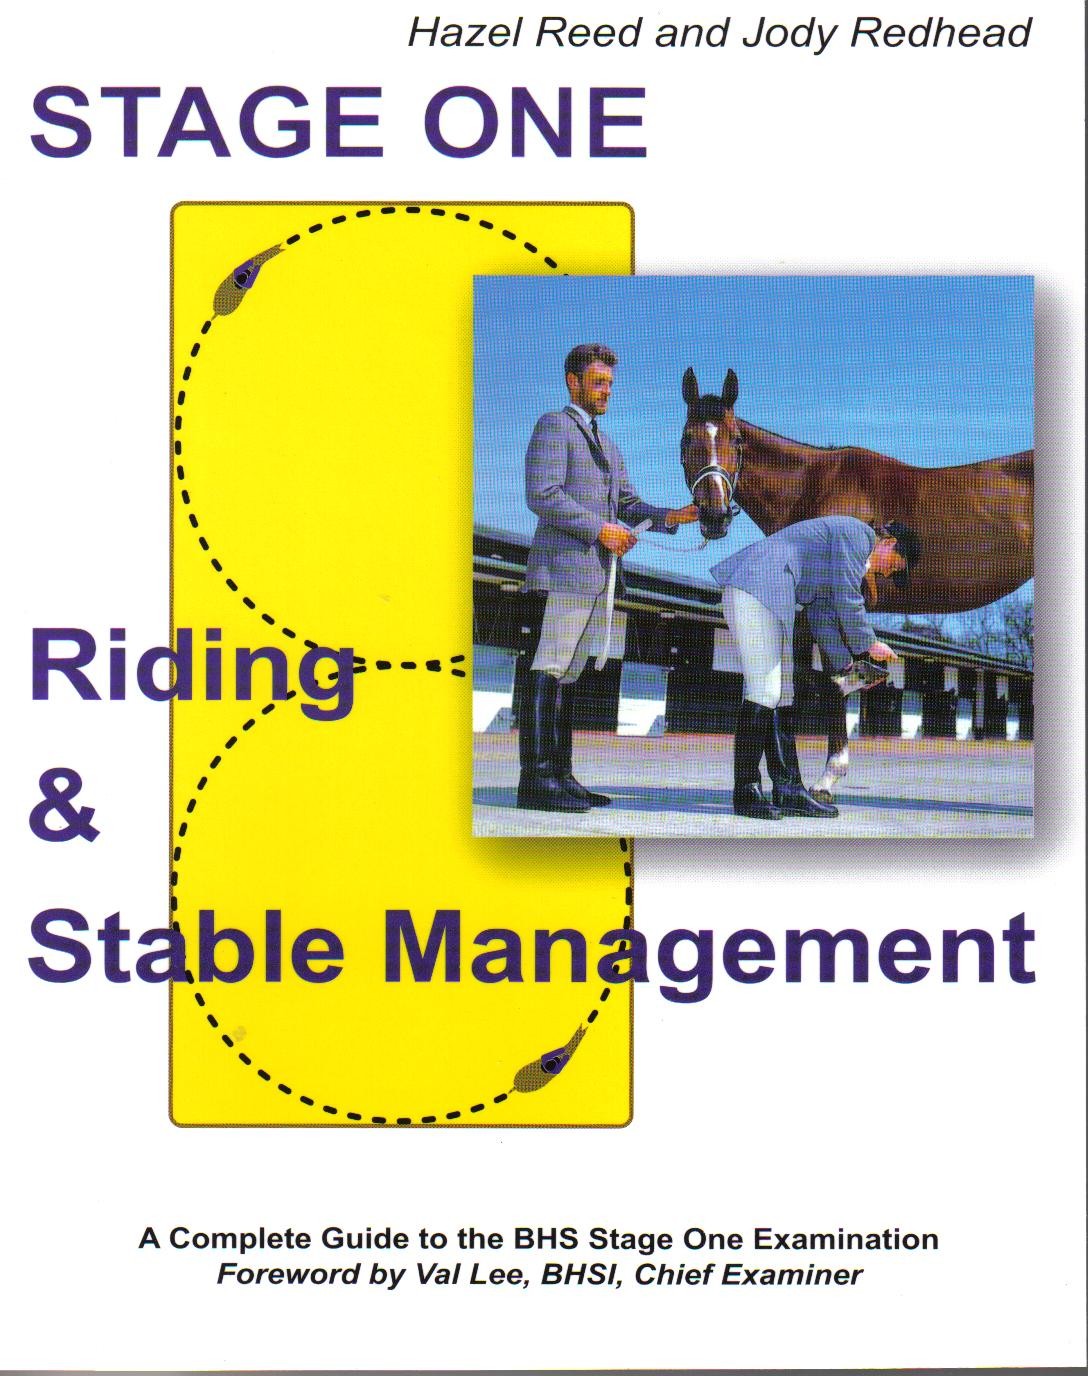 Stage One Riding and Stable Management Fourth Edition by Hazel Reed and Jody Redhead | trot-online